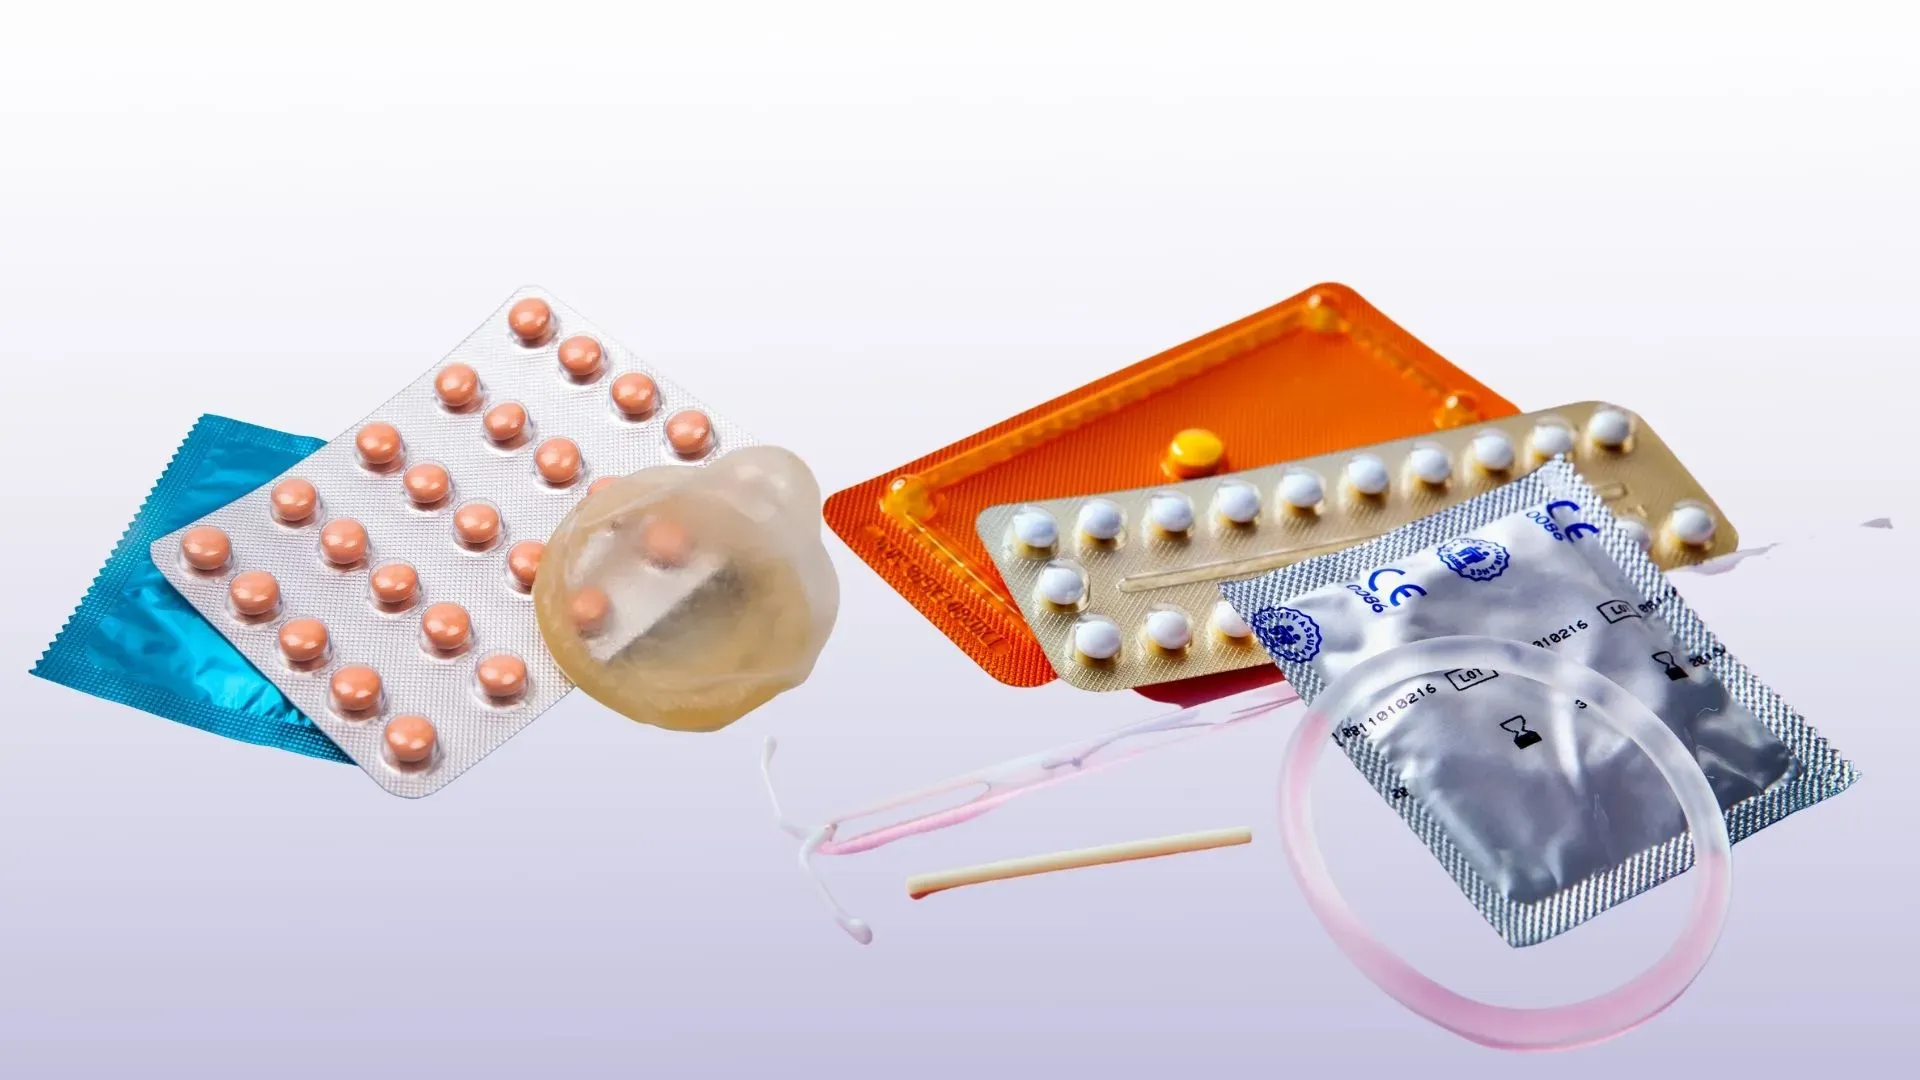 types of contraceptive methods